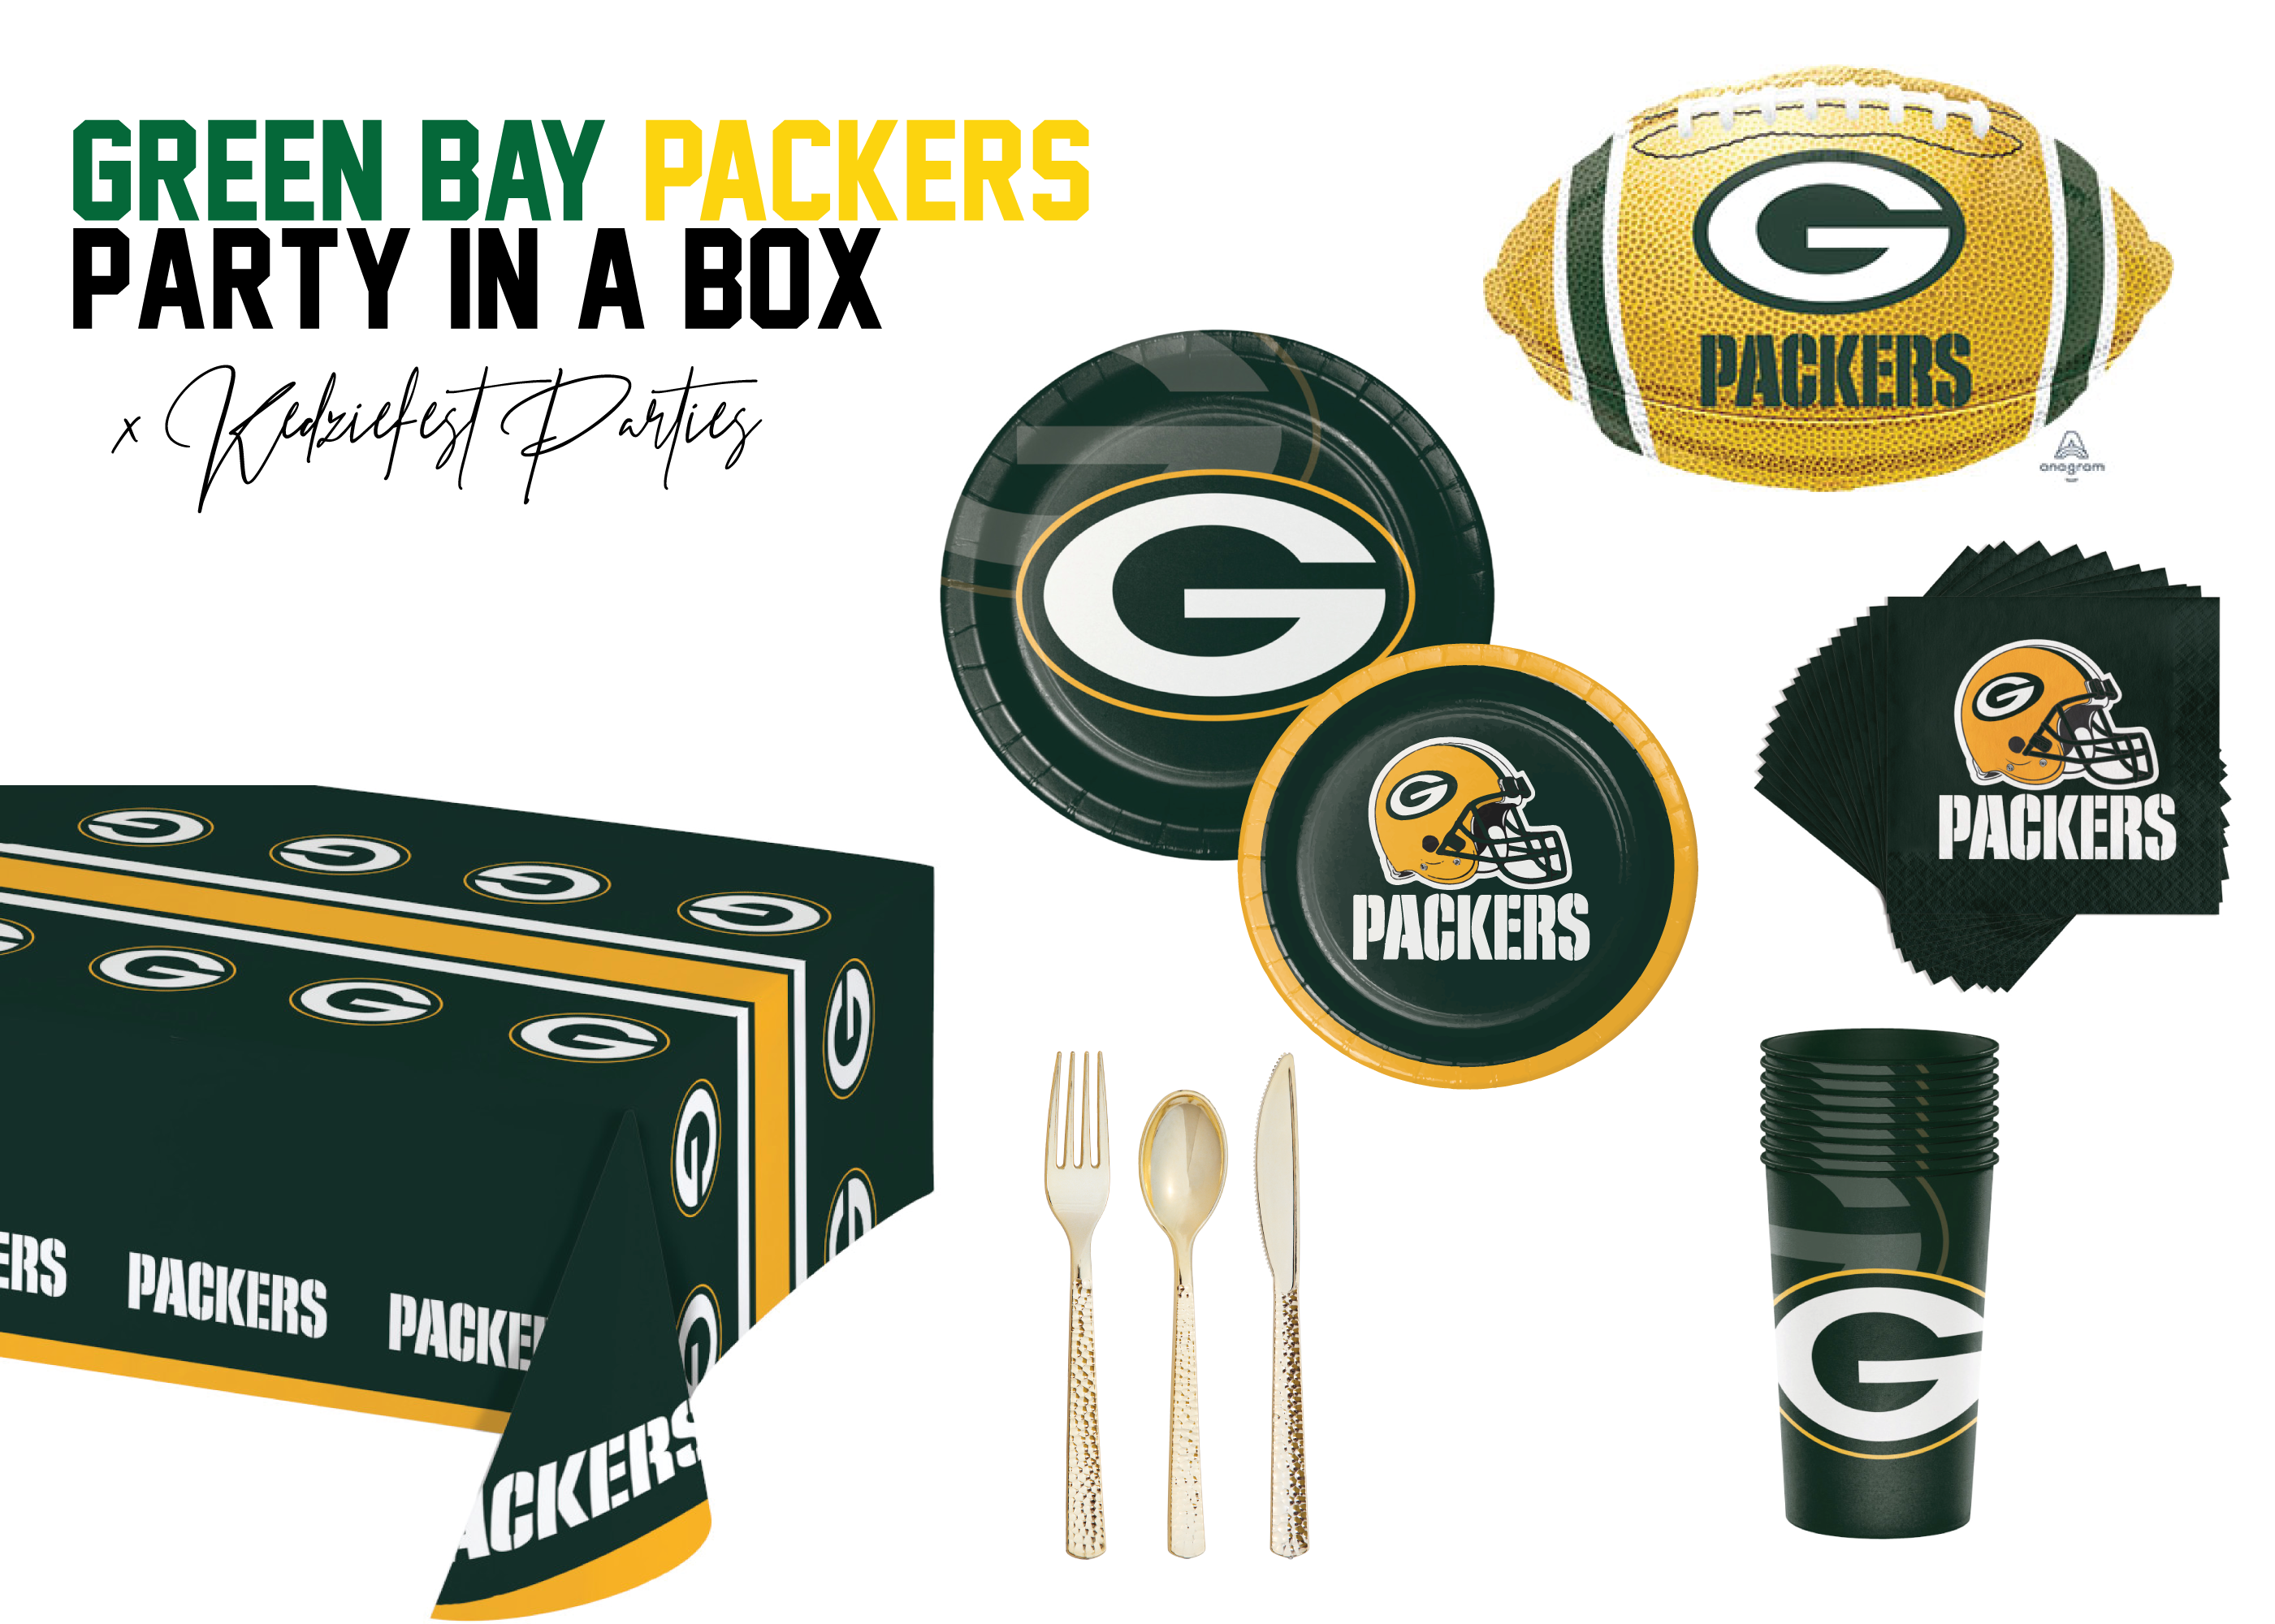 Green Bay Packers Party in a Box